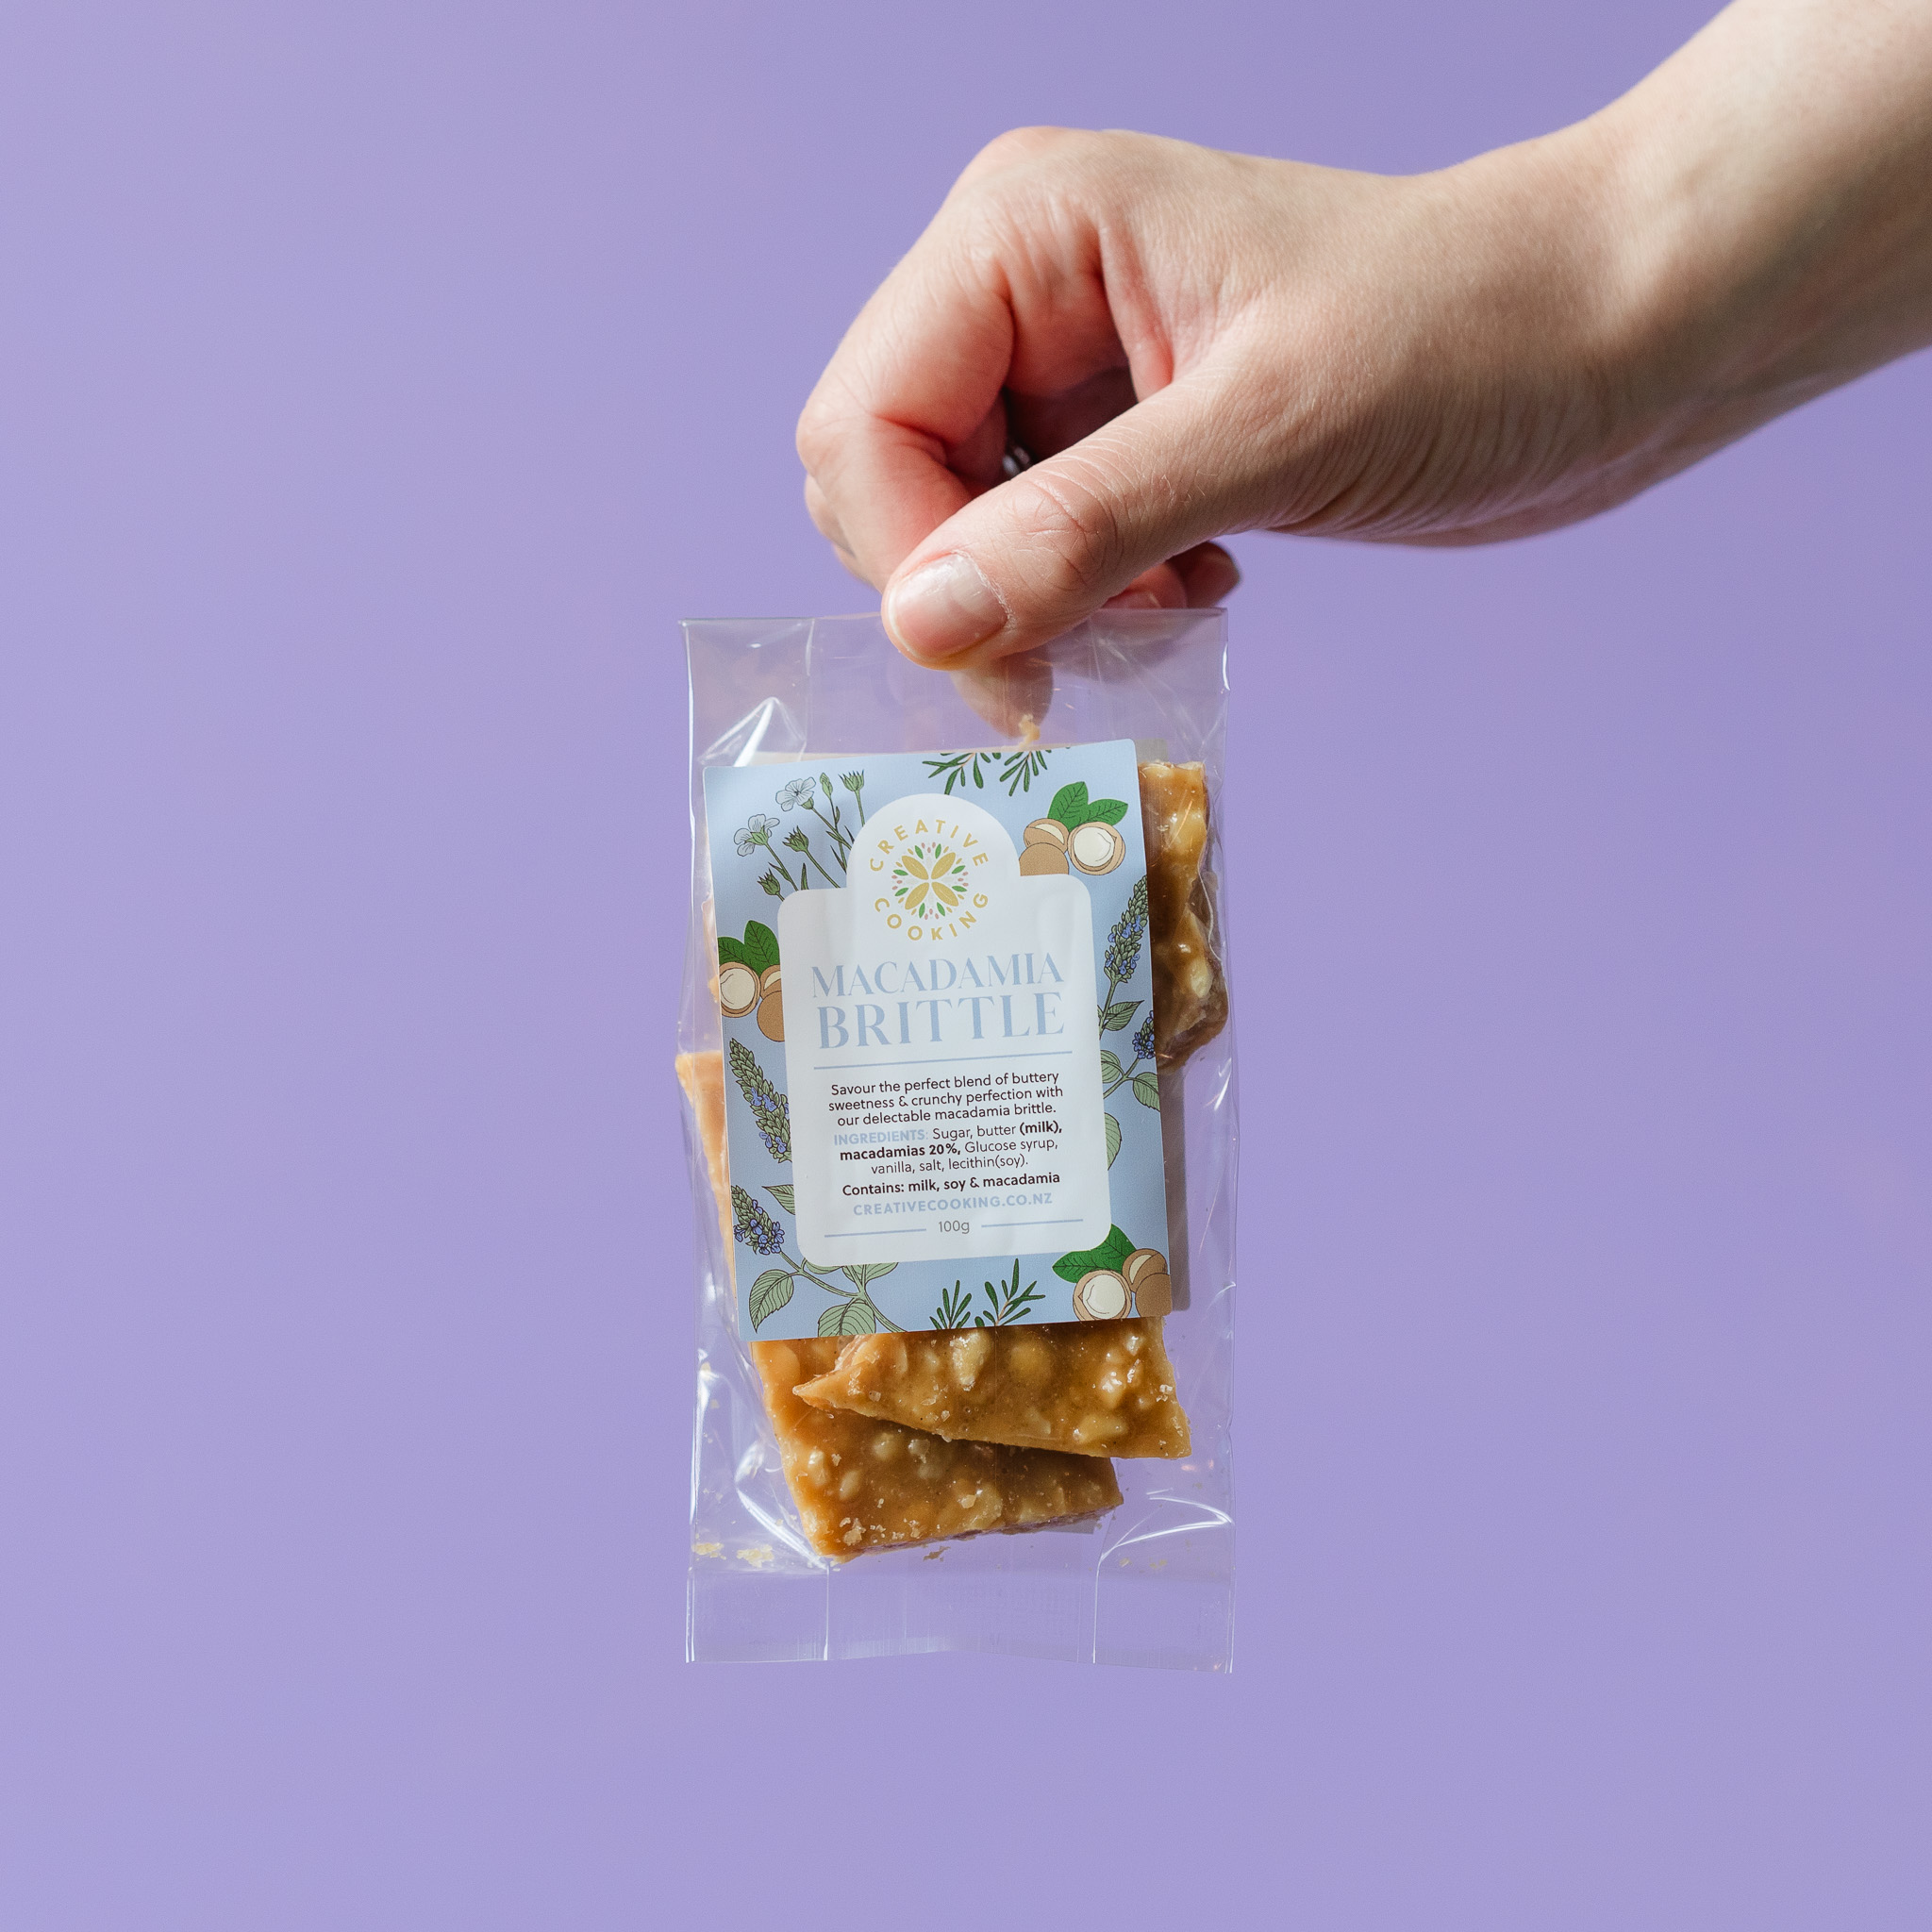 Macadamia Brittle by Superseed Crackers held by a hand against purple background